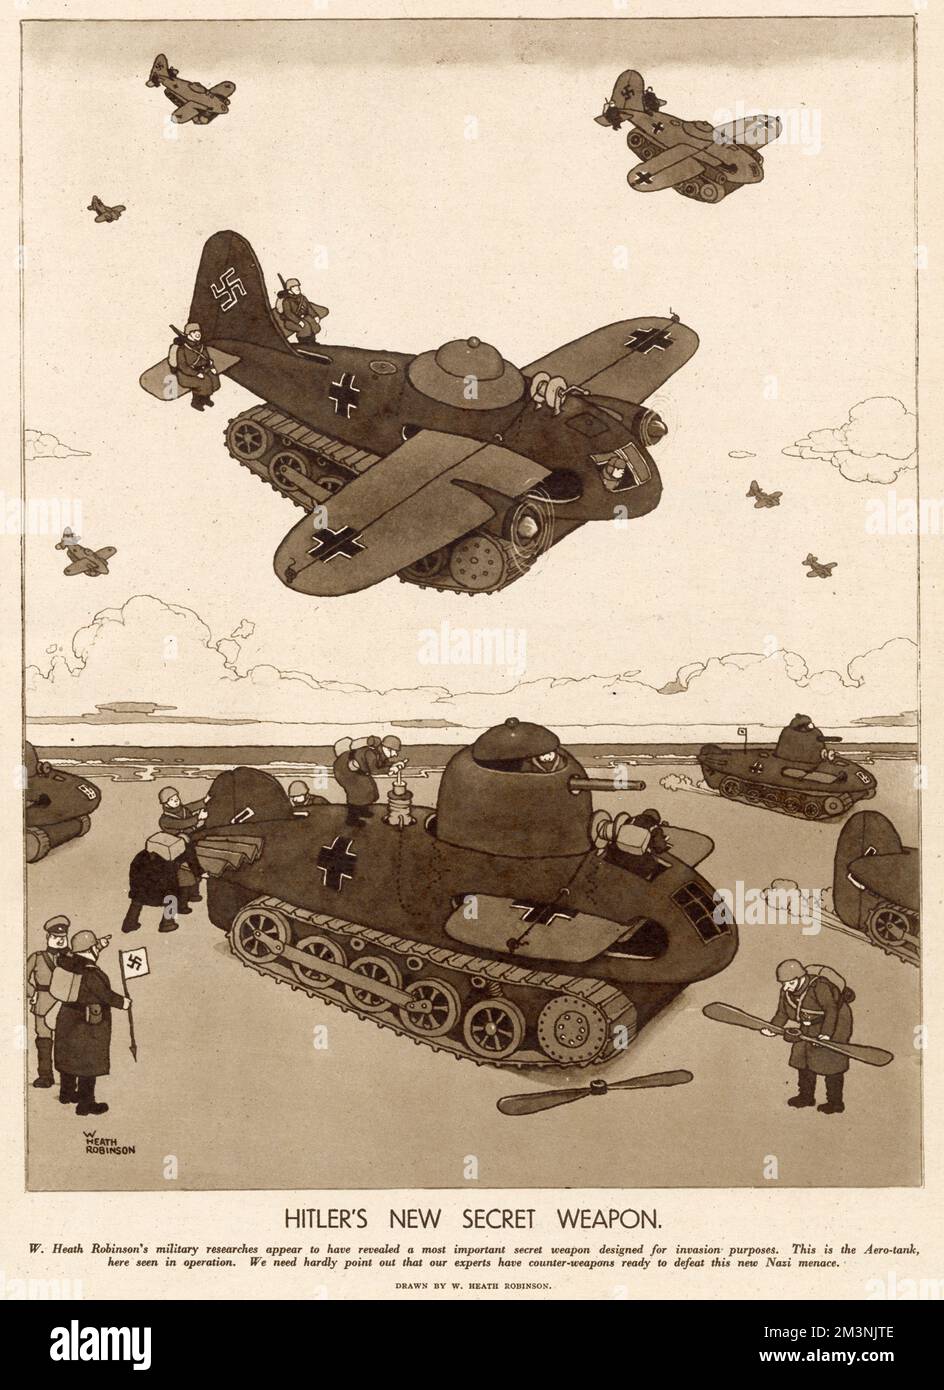 Illustration by William Heath Robinson of German's military secret weapon designed for invasion purposes. An Aero-tank that can be turned from aircraft to tank very quickly! Stock Photo